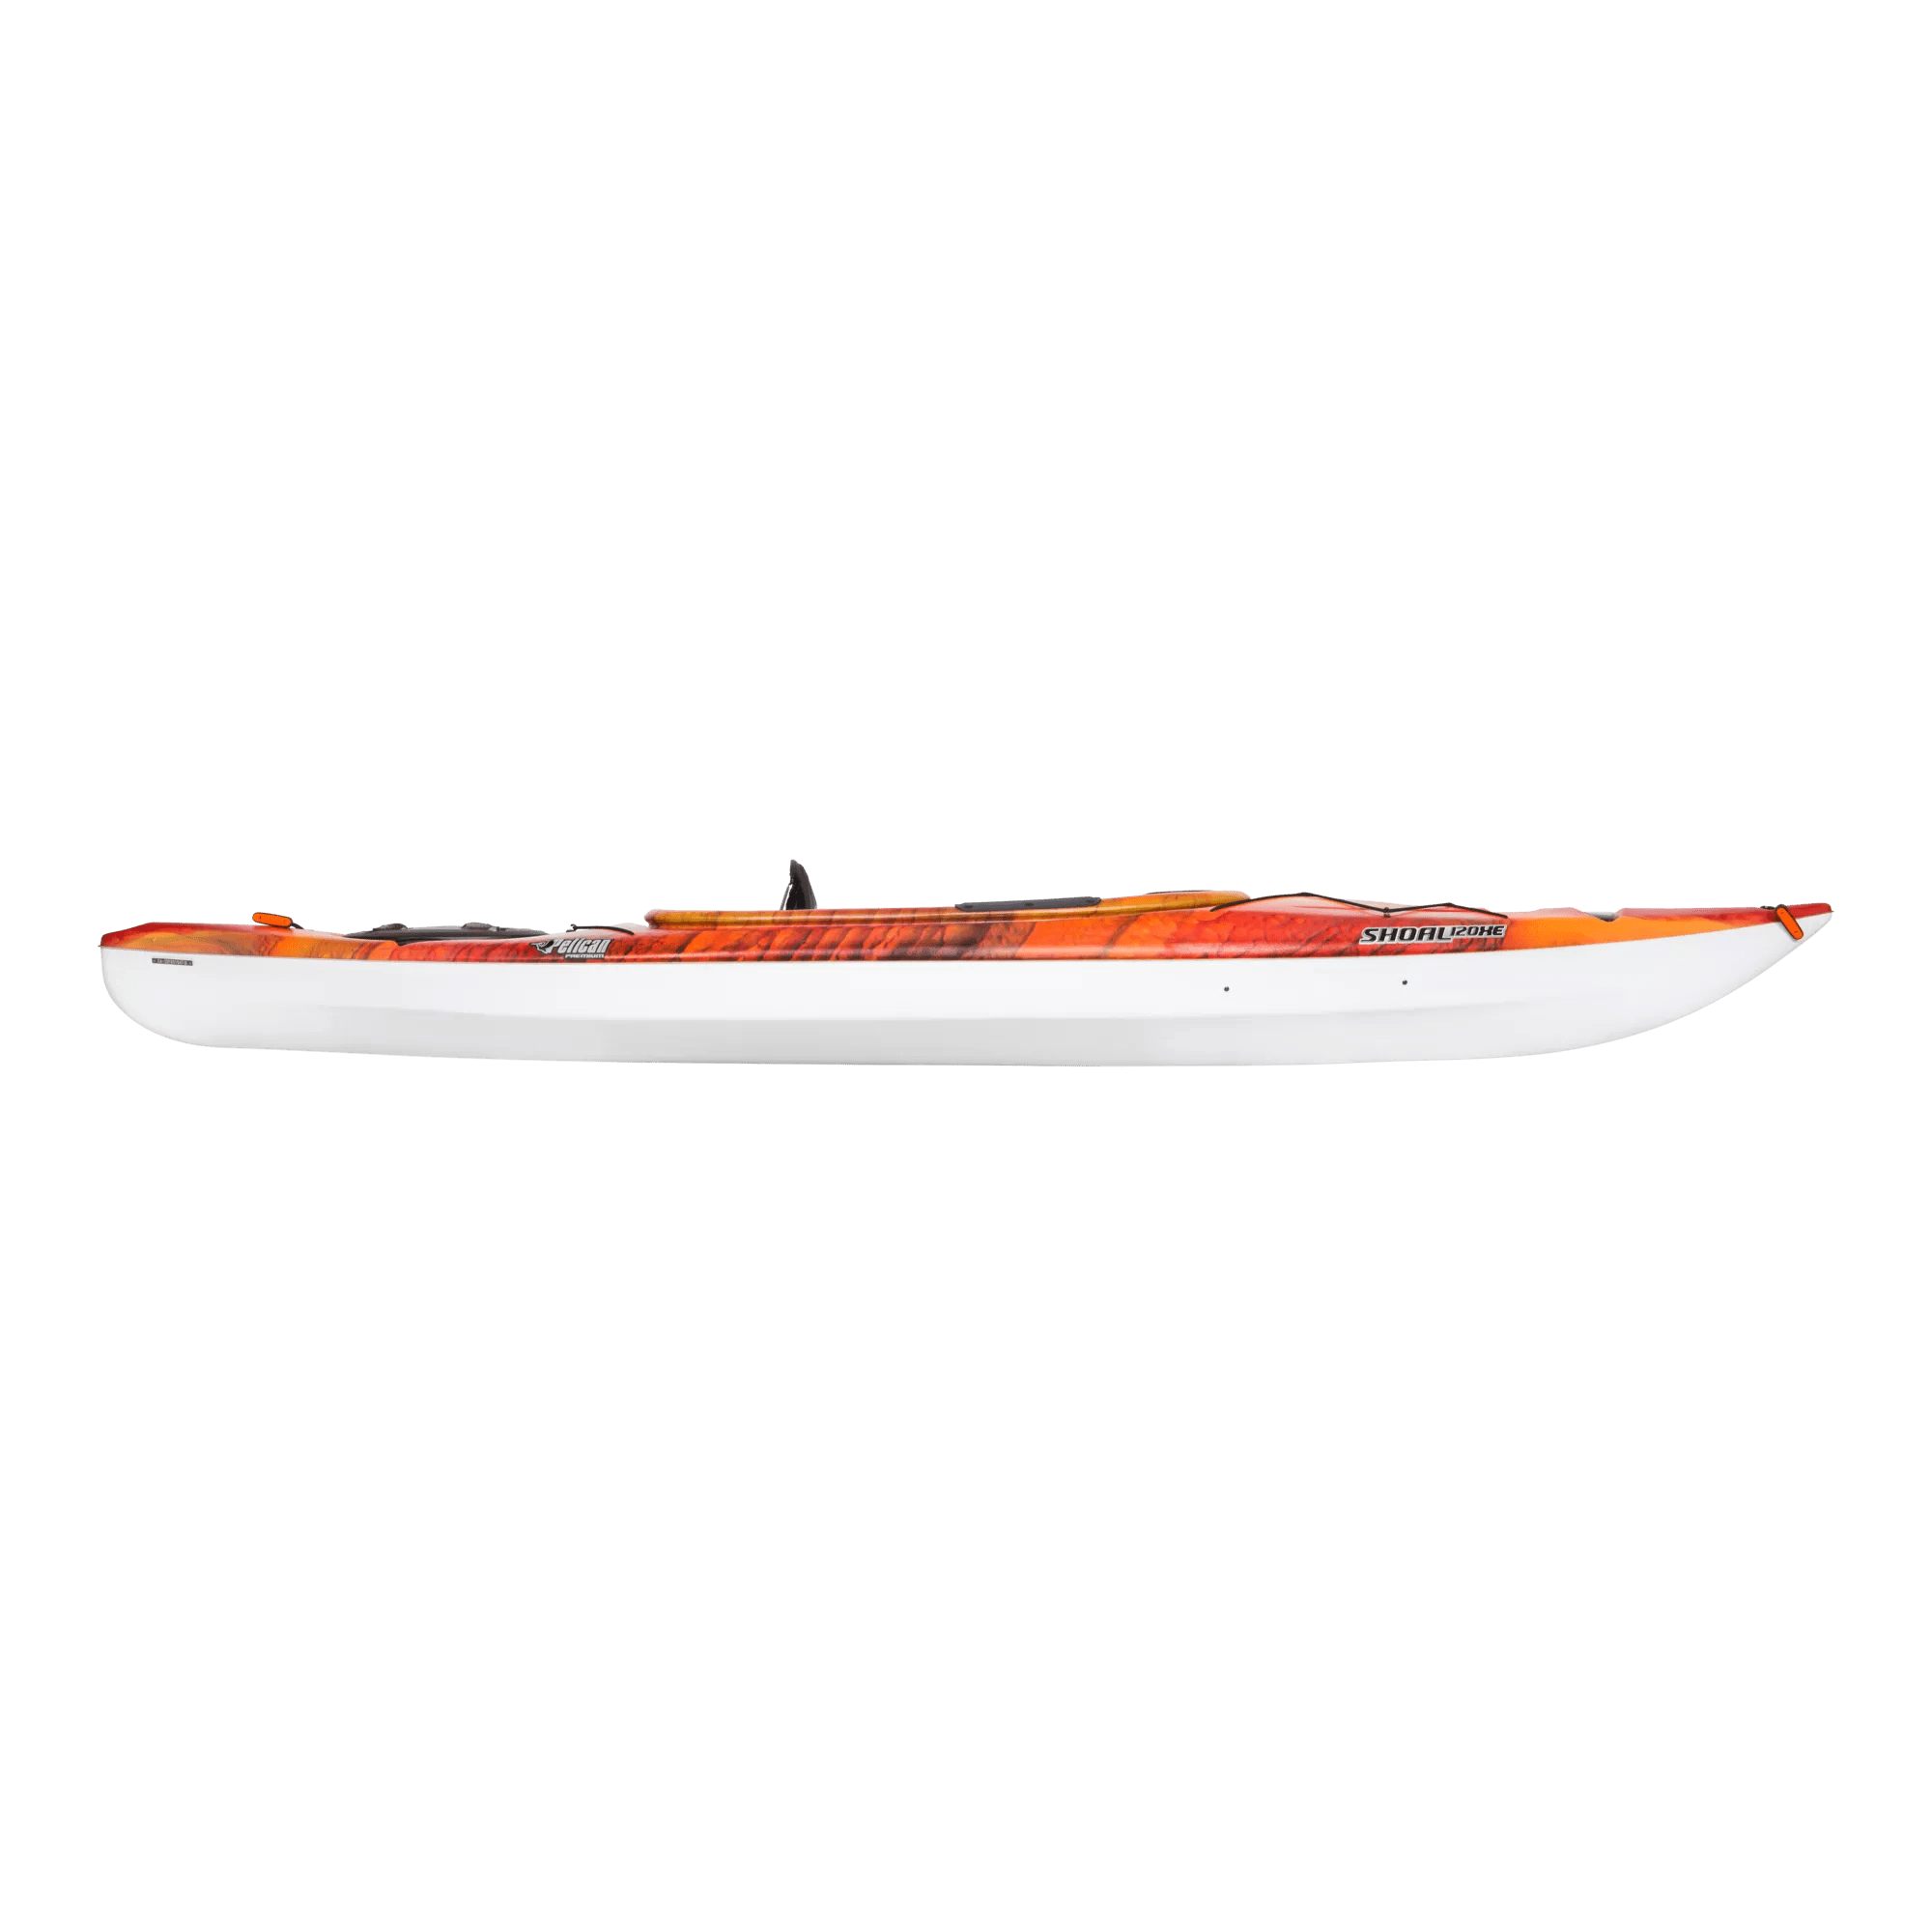 PELICAN - Shoal 120XE Recreational Kayak with paddle - Discontinued color/model - Yellow - KNP12P102-00 - SIDE